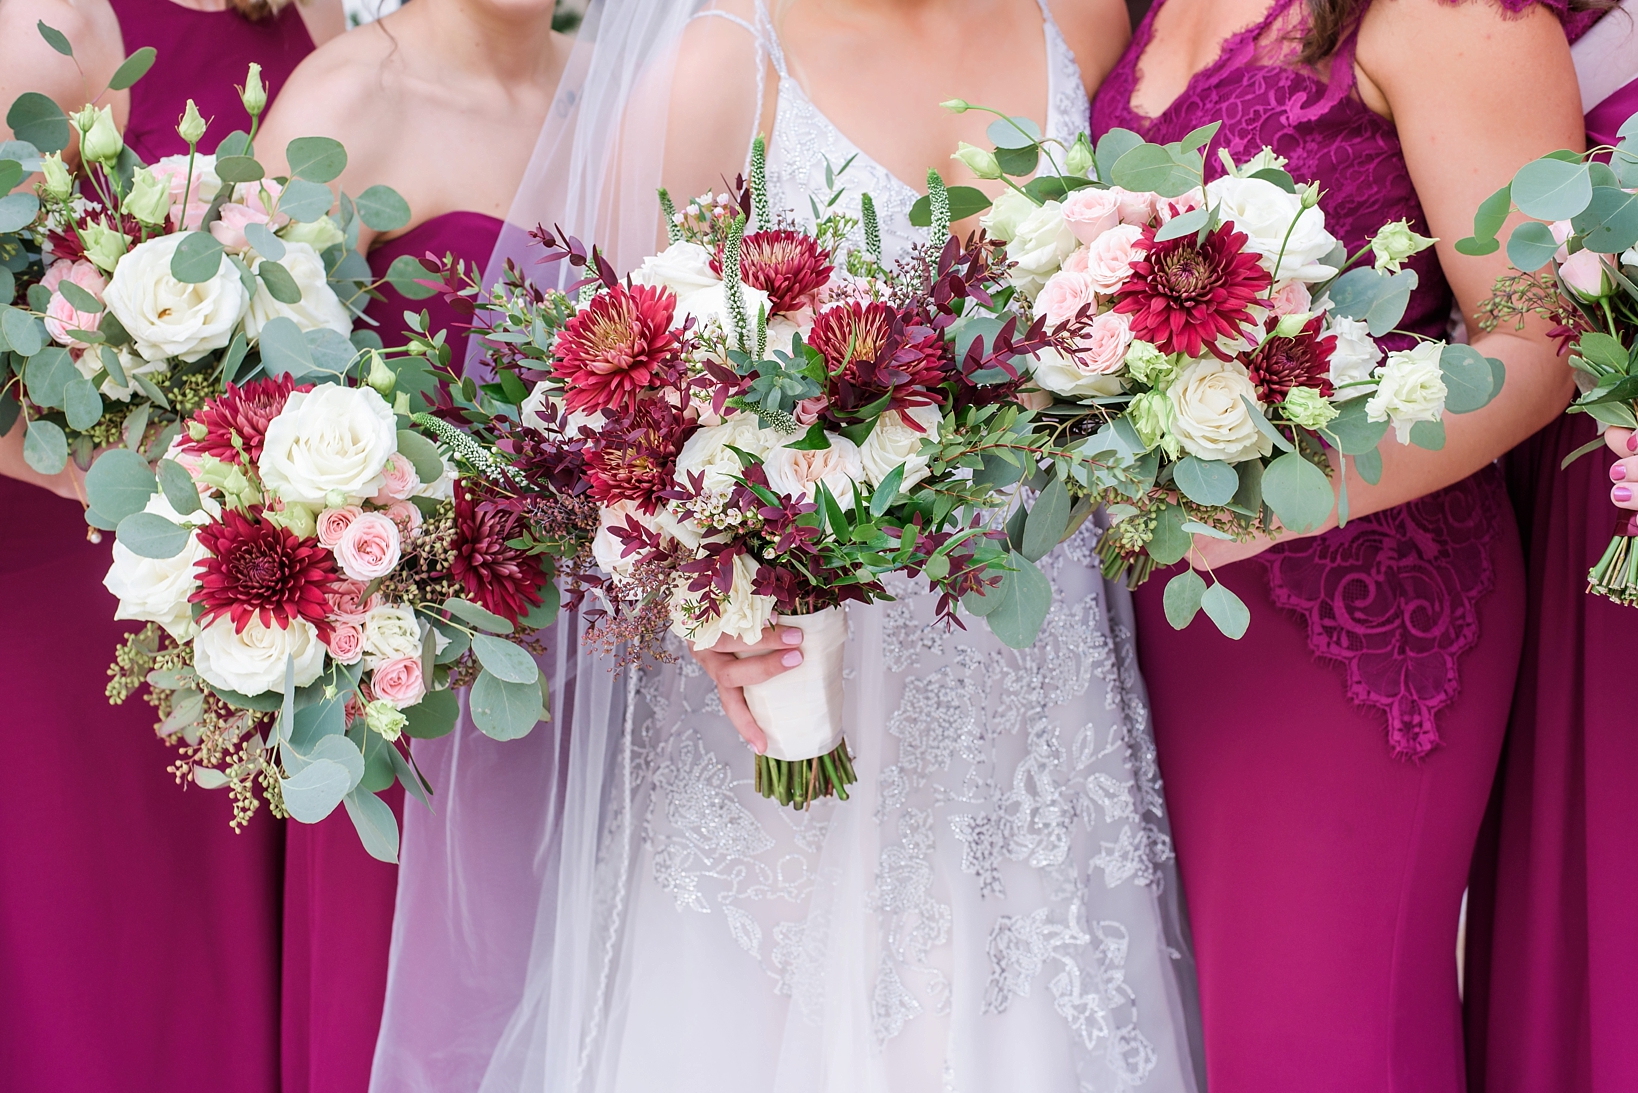 The Bride and Bridesmaid's flowers with pops of red and white